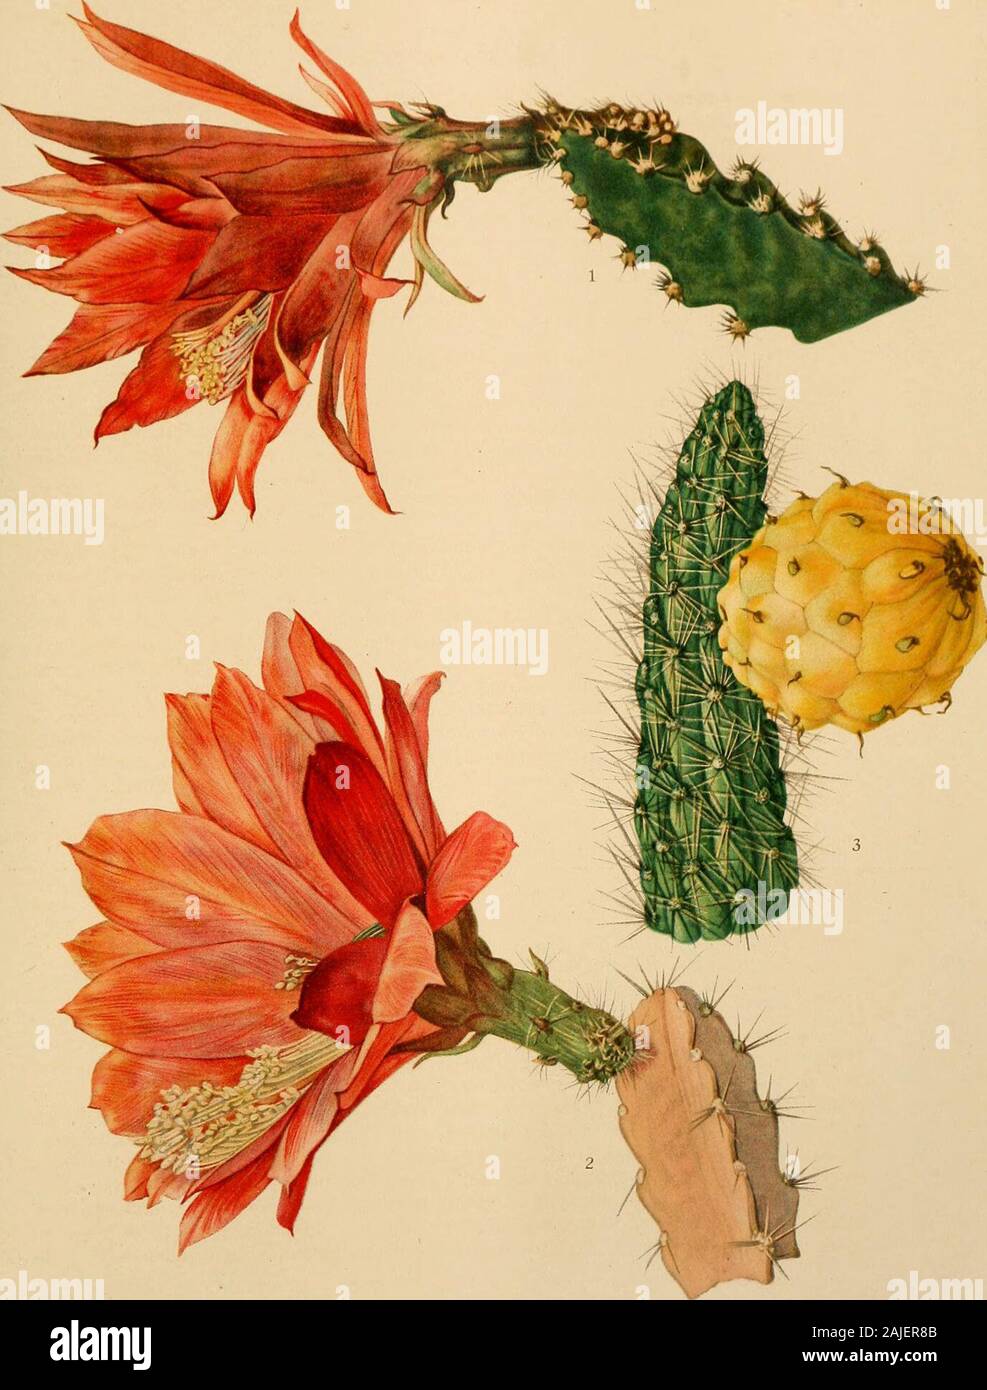 The Cactaceae : descriptions and illustrations of plants of the cactus family . .1837) as varieties of this species, as follows: var. curtisii, eugenia, guillardieri, ignescens,kiardii, lothii, and roydii. Among other named hybrids, Pfeiffer gave var. devauxii (Cereus devauxii Forster,Handb. Cact. 428. 1846). Forster (Handb. Cact. 428 to 431. 1846) also mentioned 66hybrids with this species, among which are: blindii Haage, colmariensis Haage, danielsiiHaage, edesii Booth, elegans Booth,finkii Salm-Dyck, gebvillerianus Haage, gloriosus Haage,hitchensii and its varieties hybridus and speciosus, Stock Photo